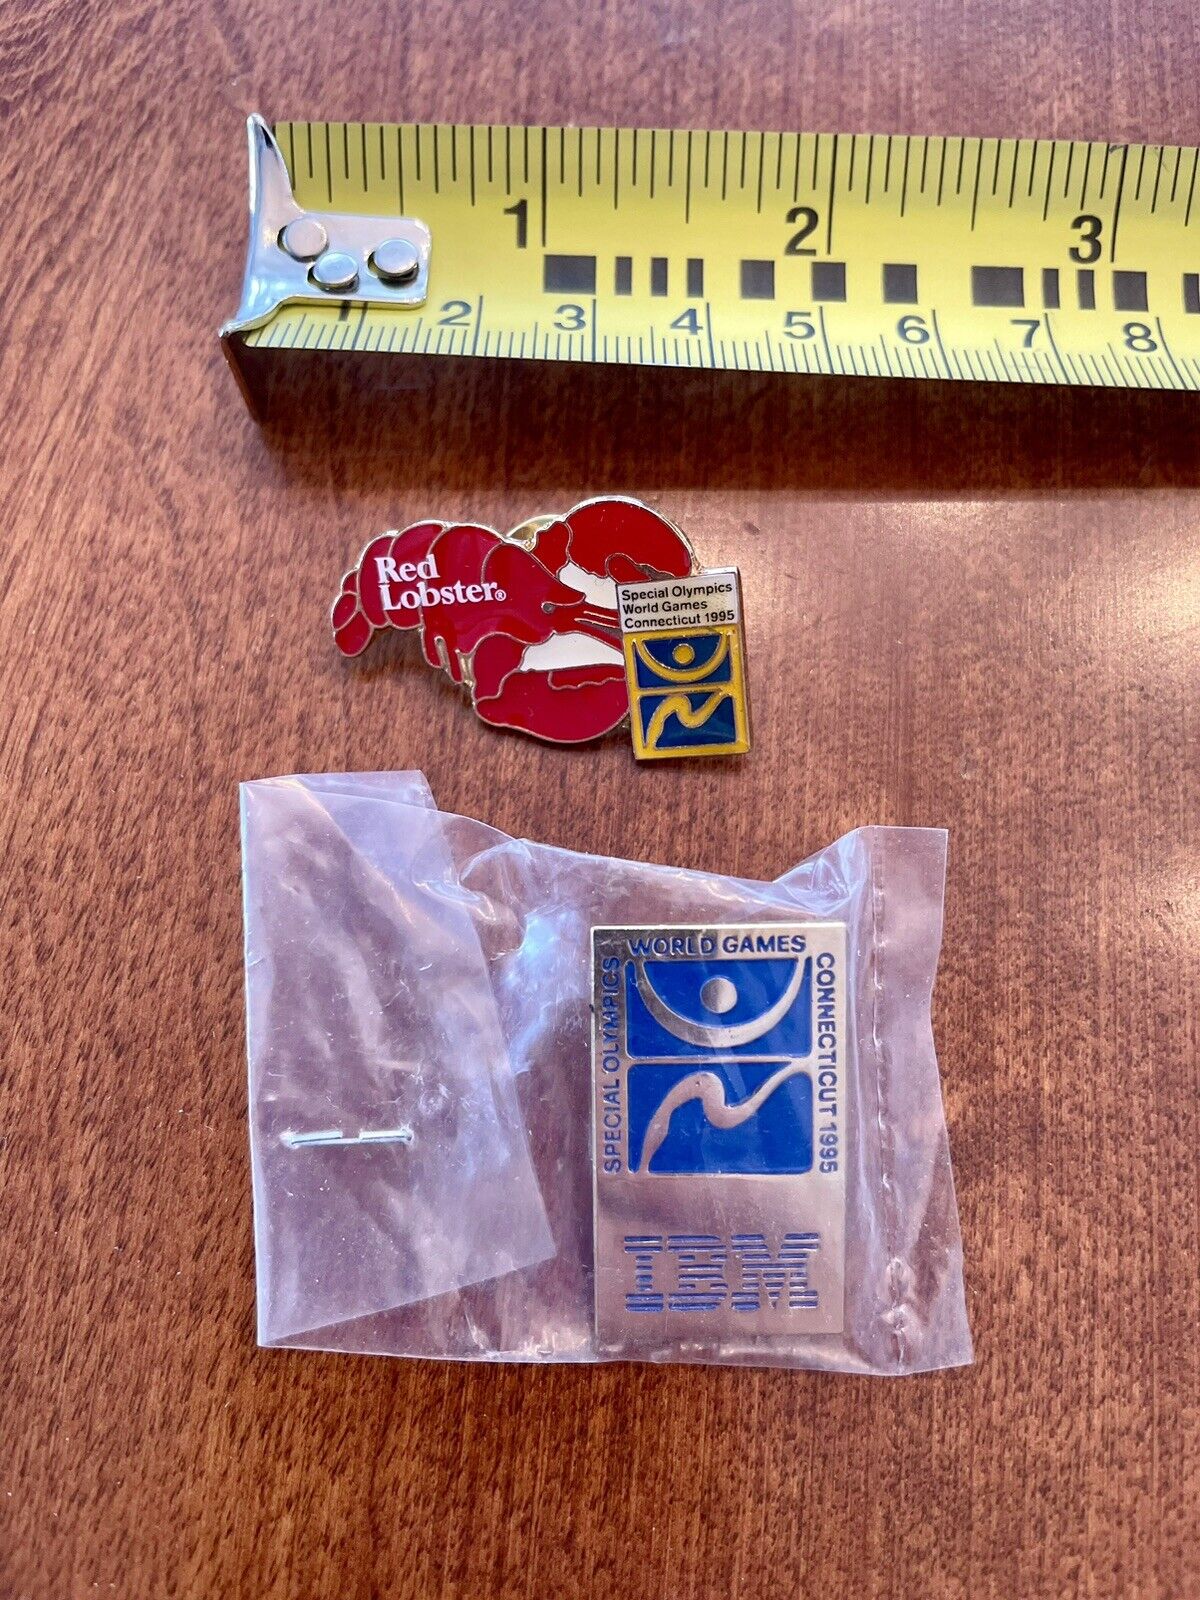 Special Olympics World Games Connecticut 1995 IBM Red Lobster Lapel Pin